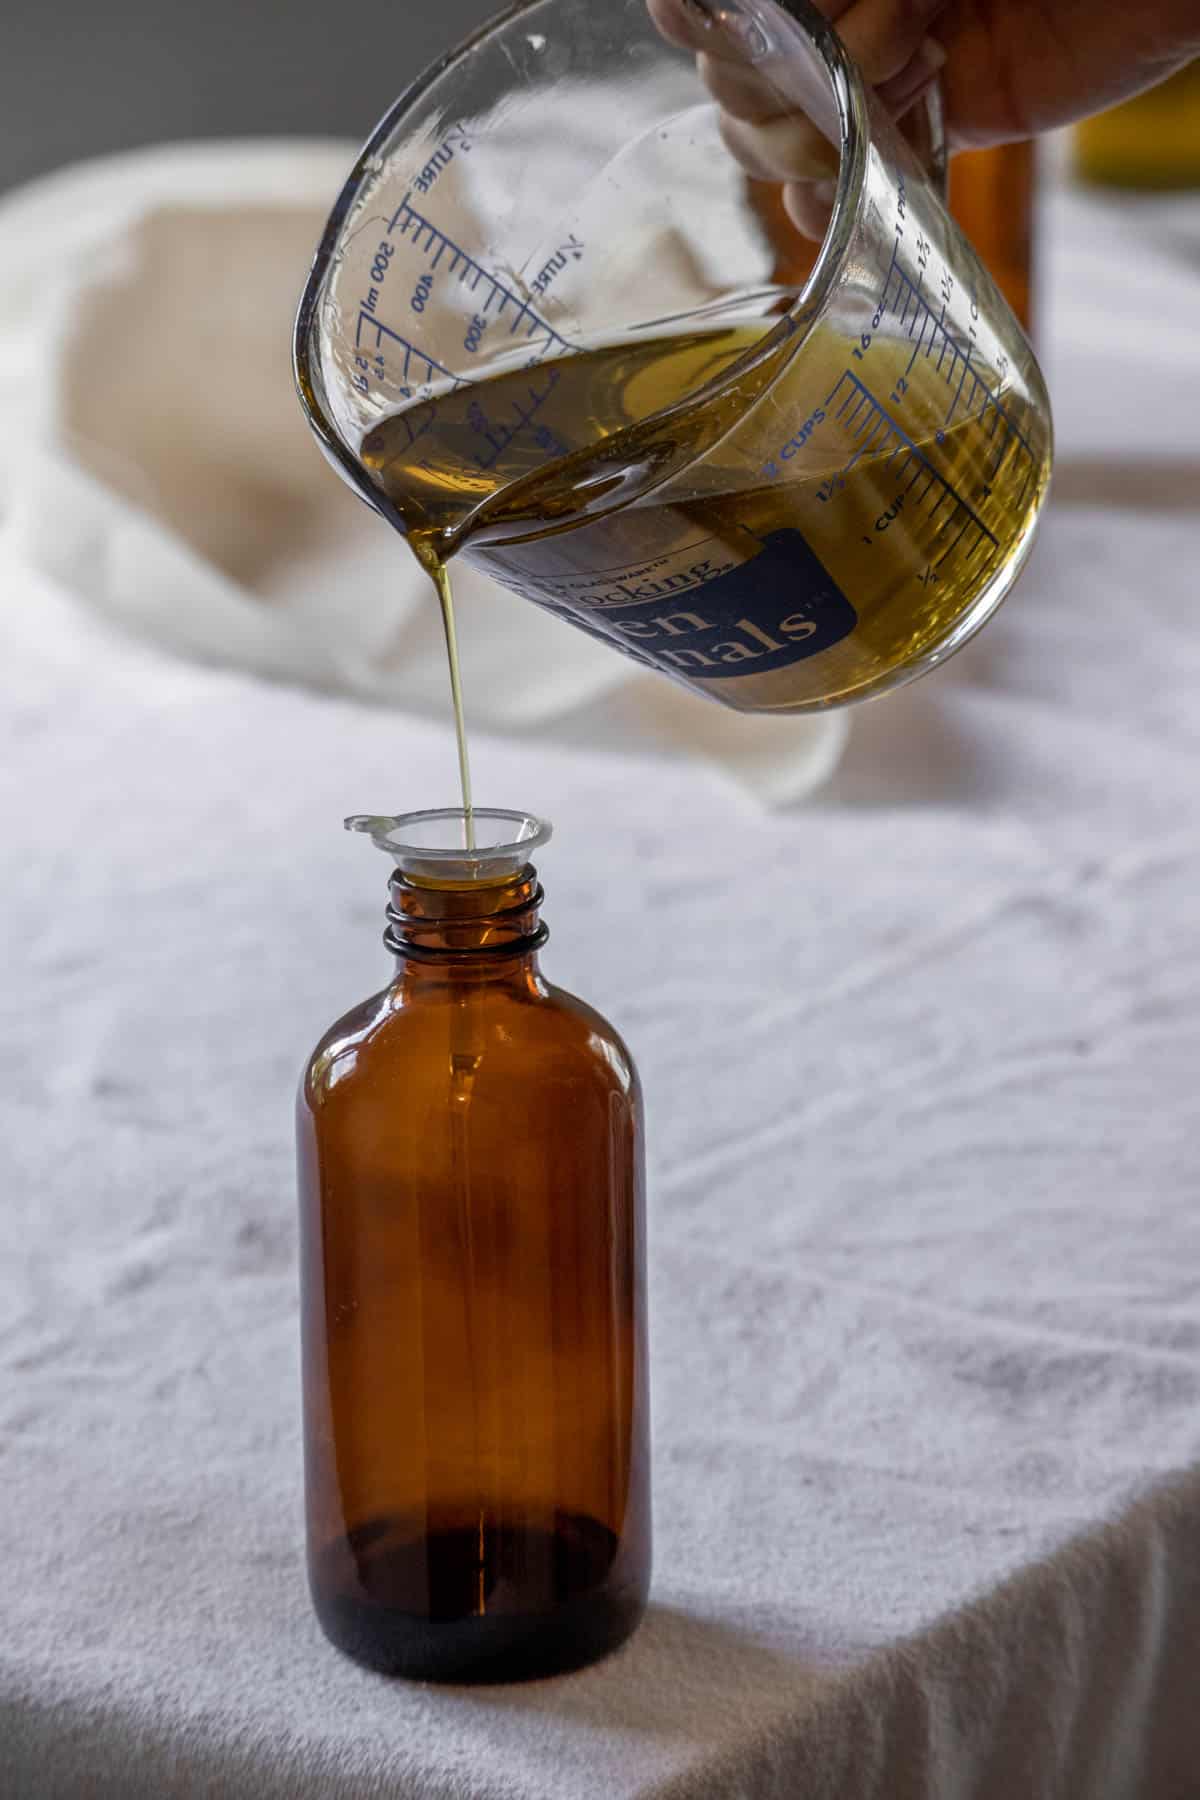 Pouring rosemary oil into an apothecary jar